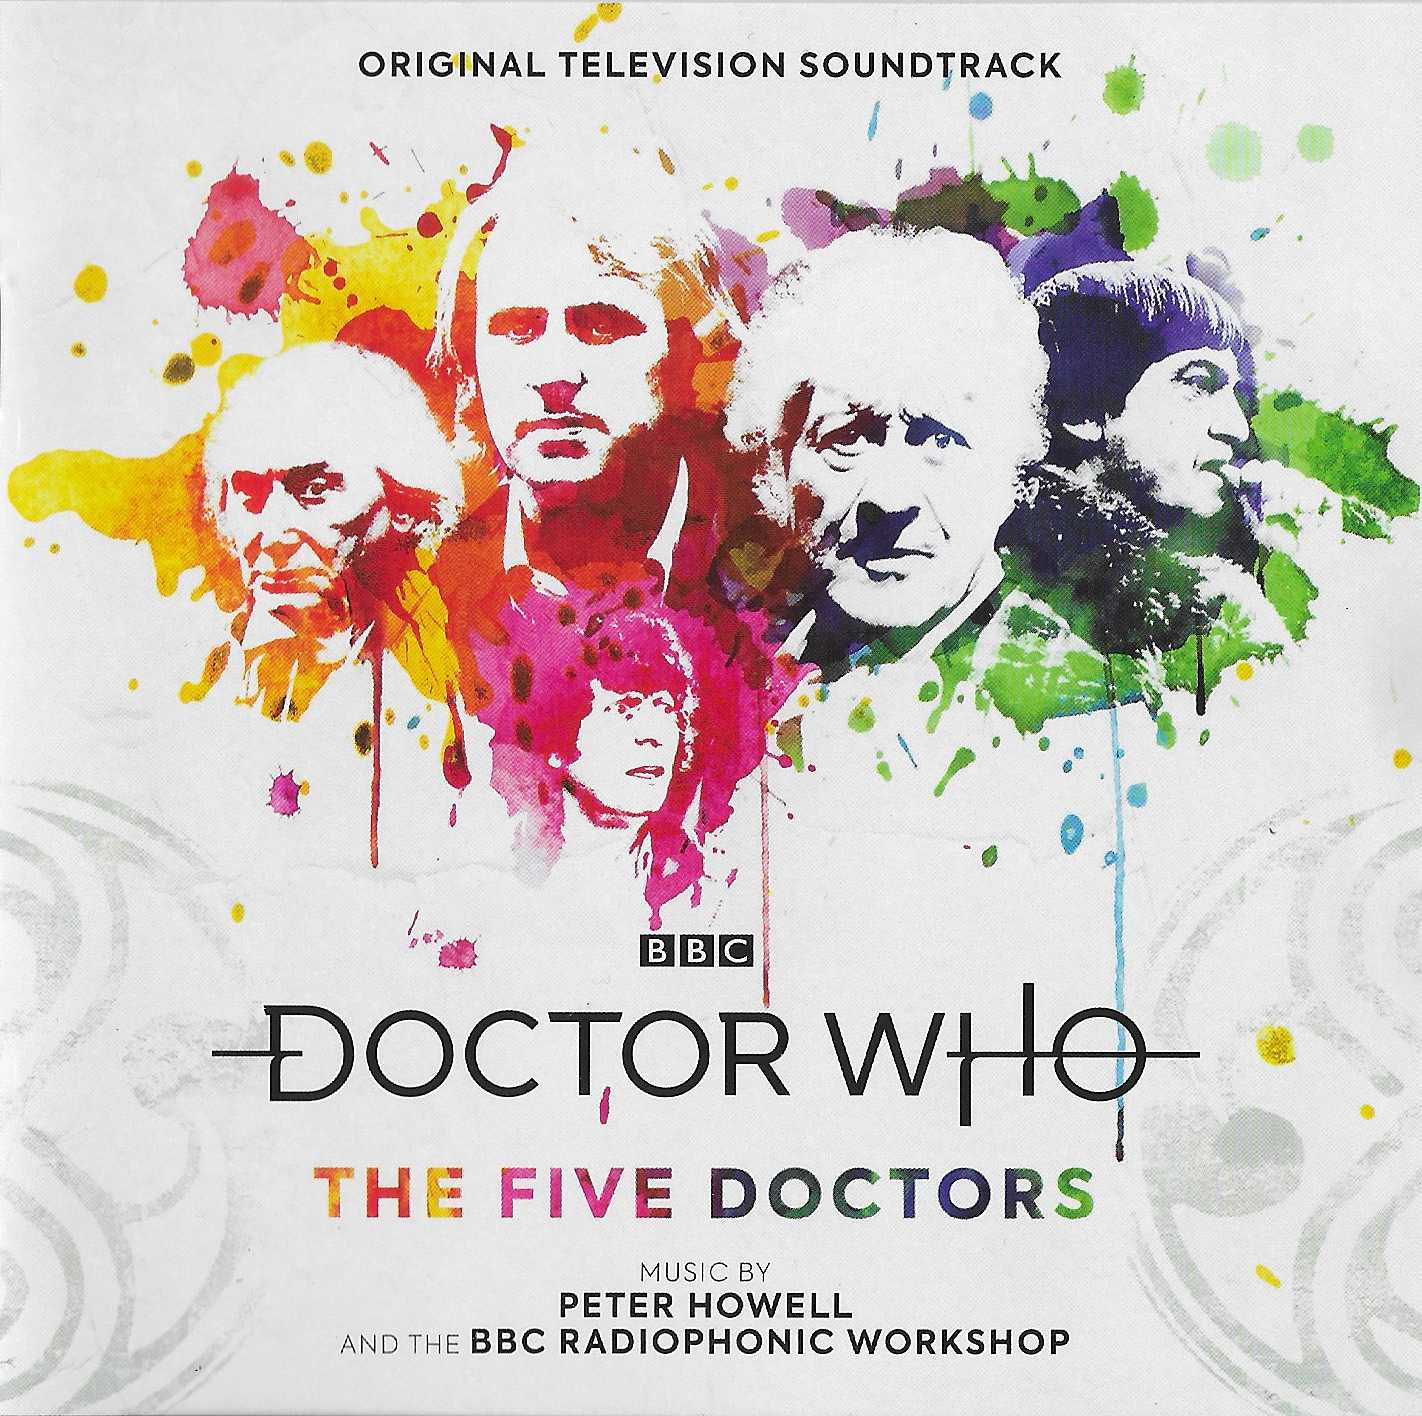 Picture of Doctor Who - The five Doctors by artist Peter Howell from the BBC cds - Records and Tapes library